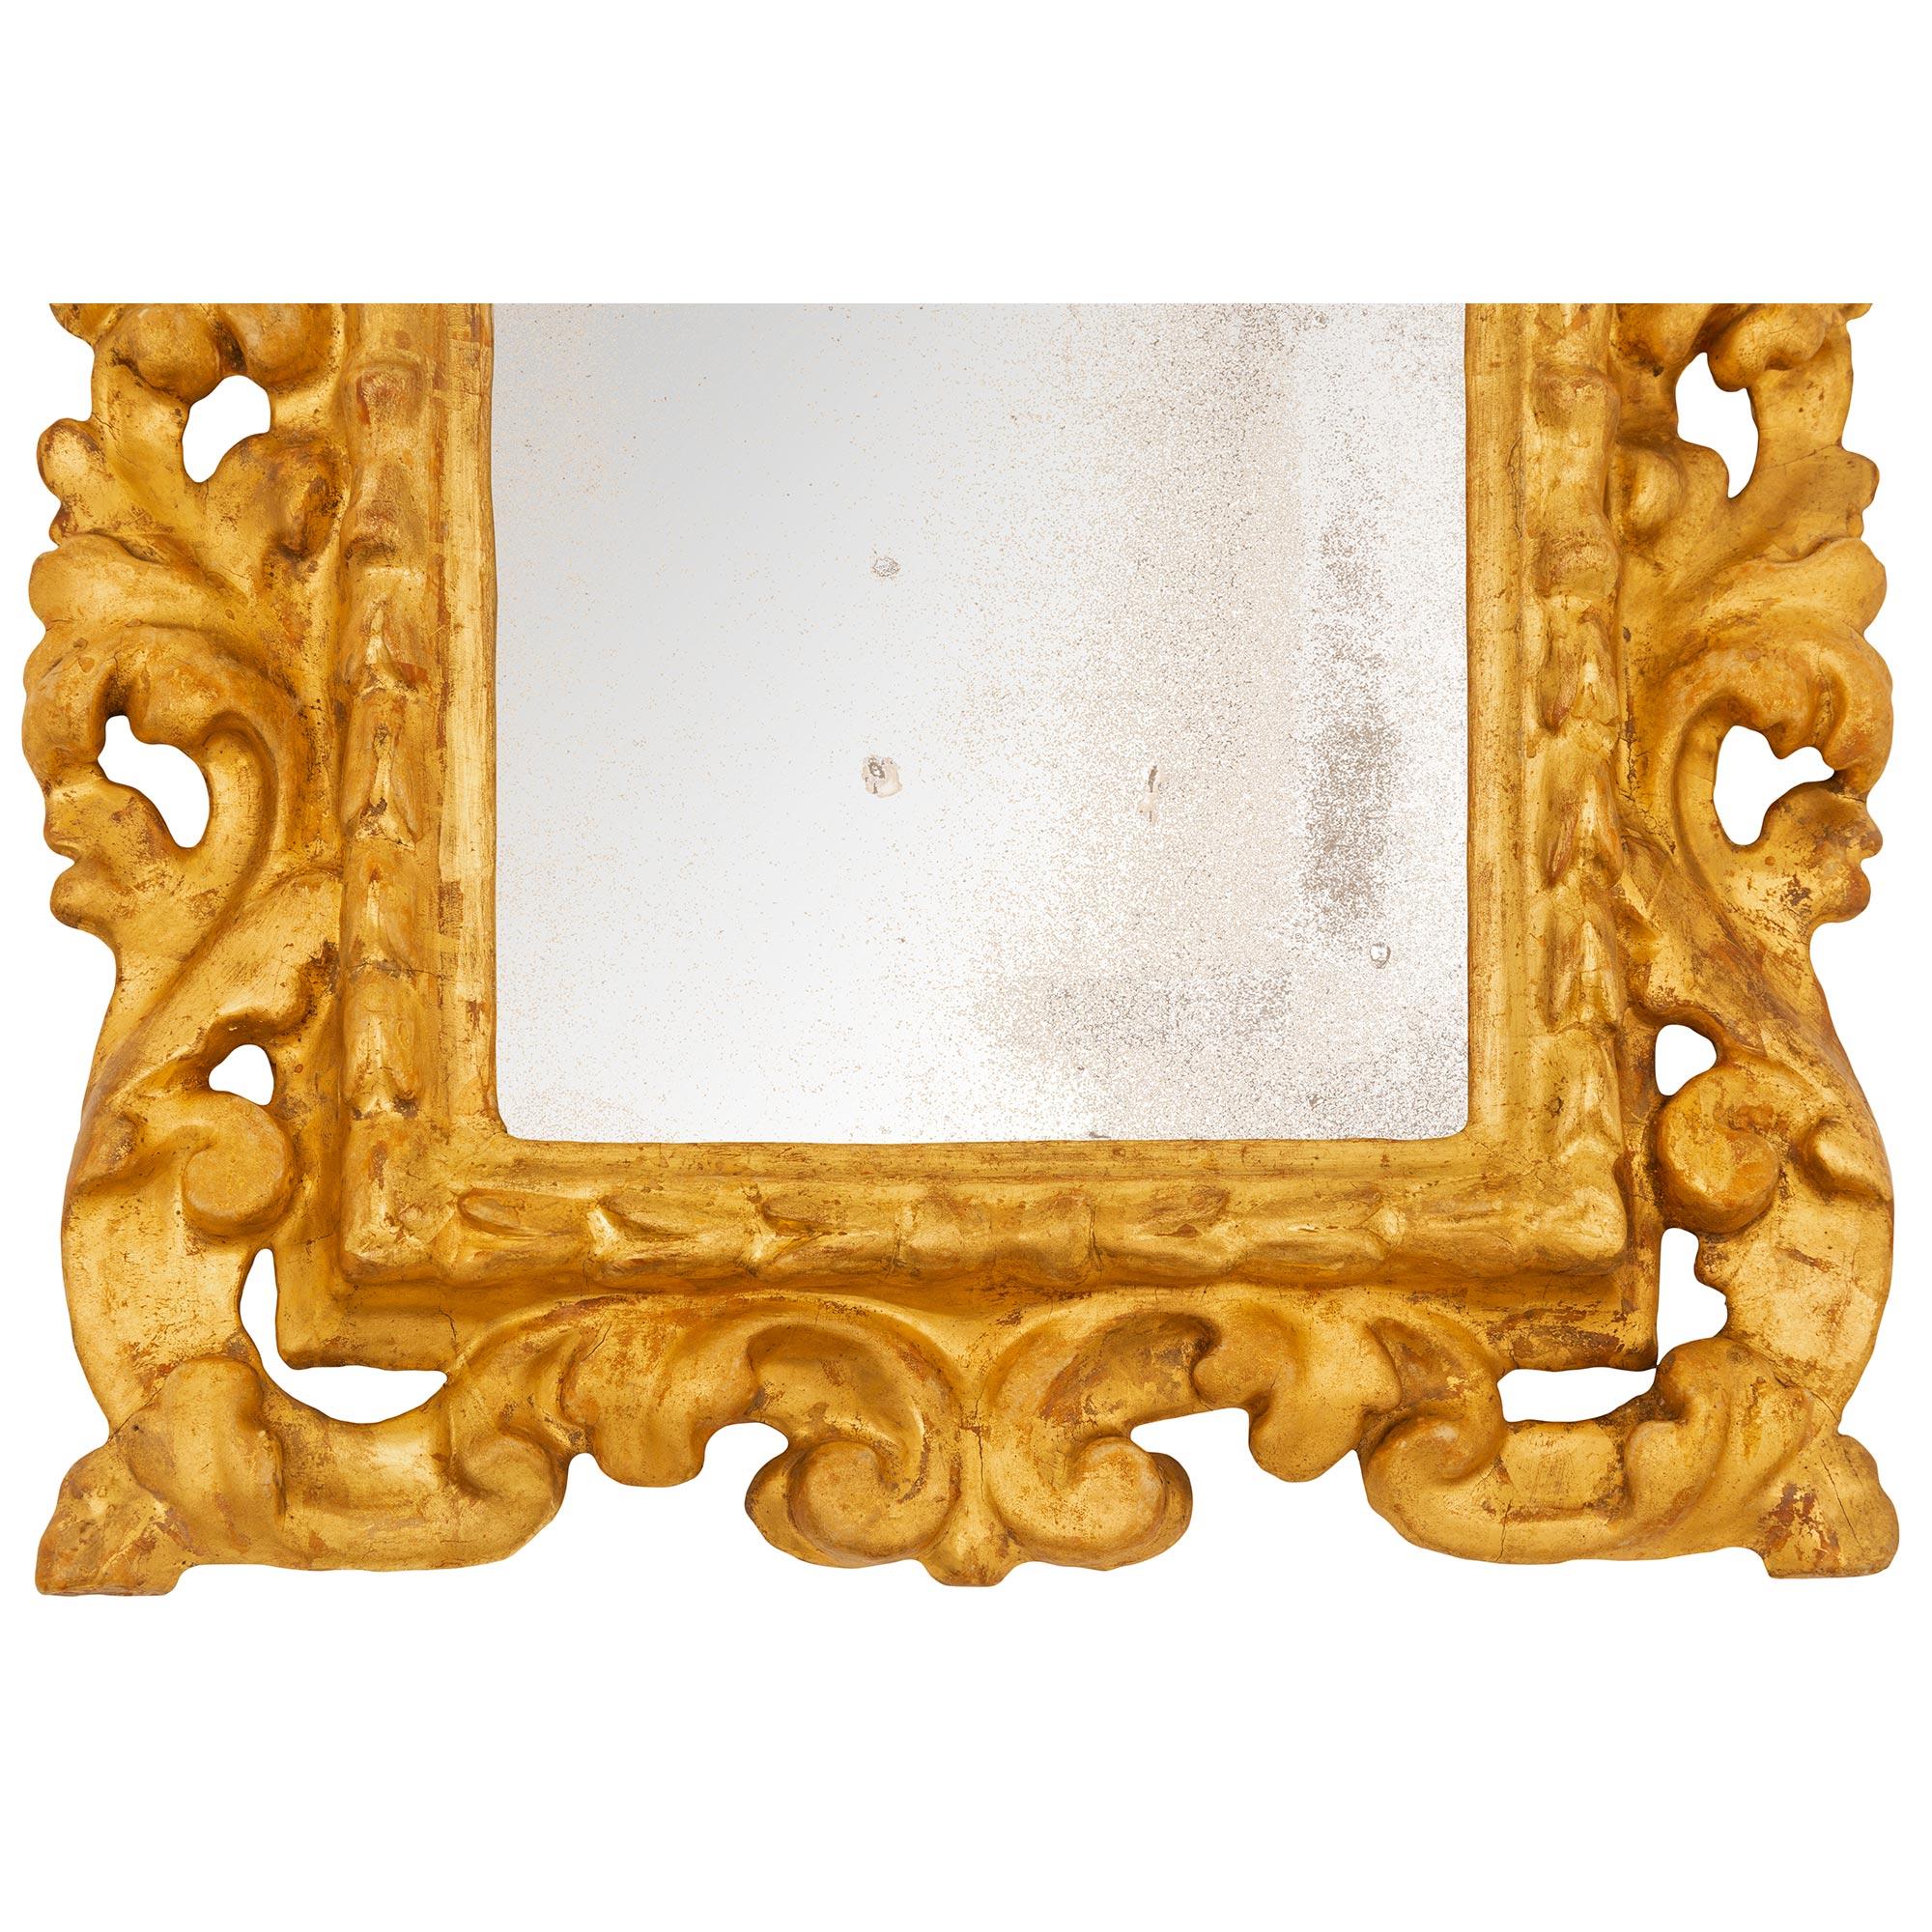 Pair of Italian Early 18th Century Baroque Period Giltwood Mirrors For Sale 4